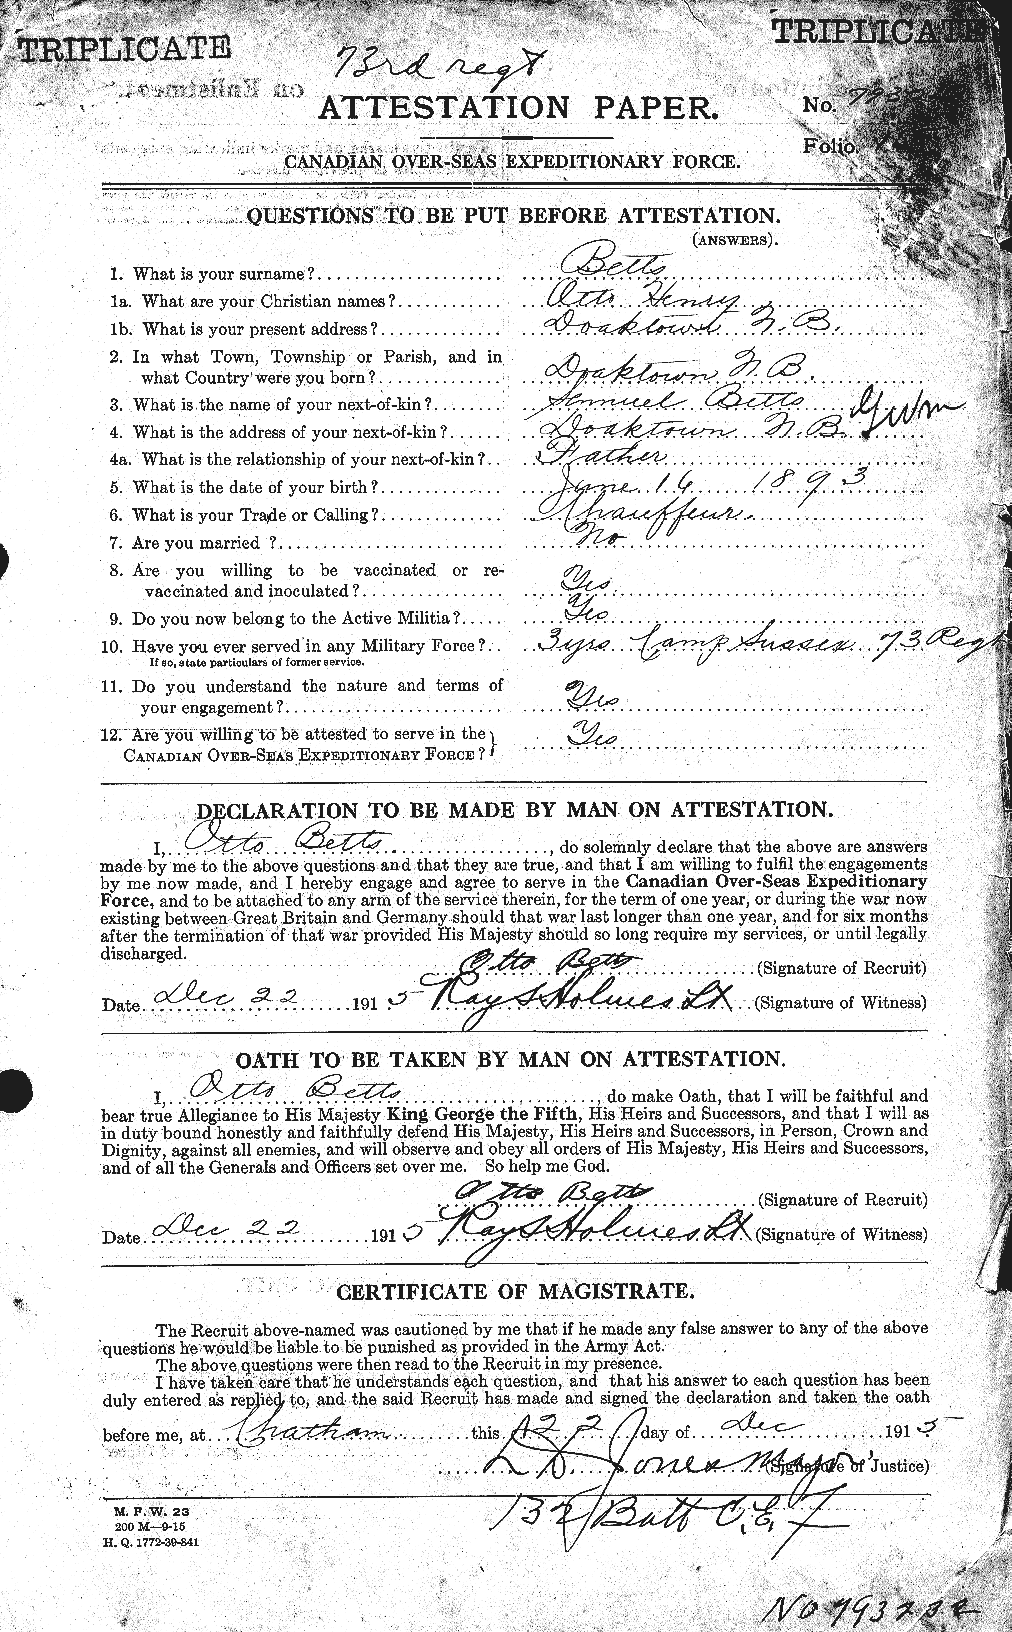 Personnel Records of the First World War - CEF 237187a